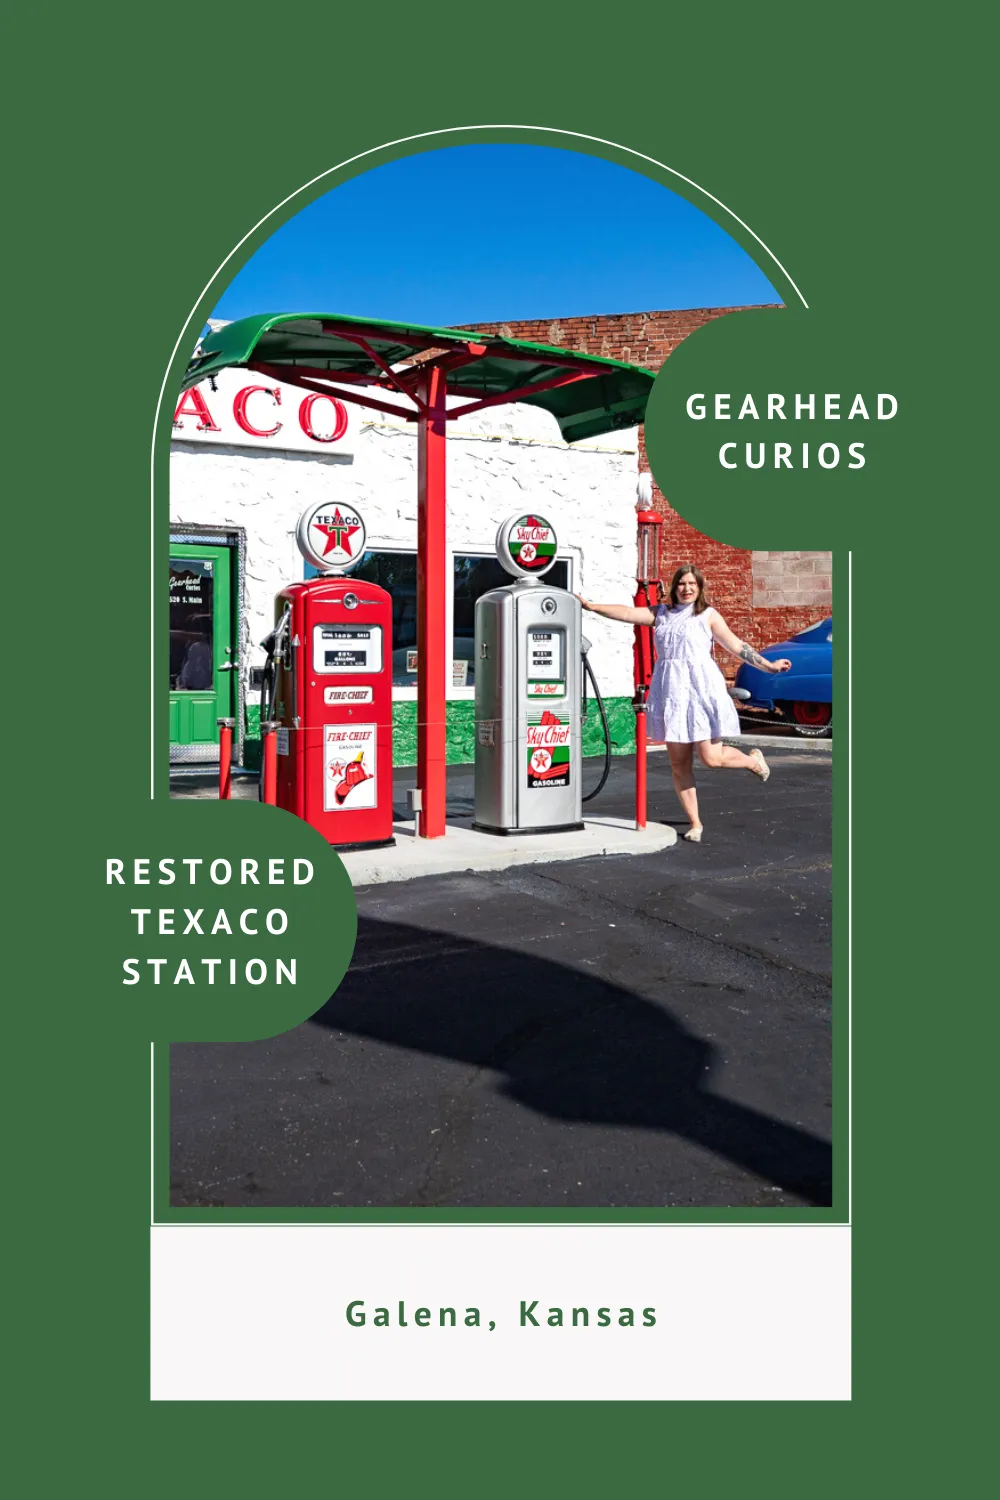 The historic 1939 Texaco gas station in Galena, Kansas had seen better days. That is, until an army veteran got involved. The now restored Texaco station has a refreshed appearance and bright neon and is home to Gearhead Curios and a nod to Cars.  #RoadTrips #RoadTripStop #Route66 #Route66RoadTrip #KansasRoute66 #Kansas #KansasRoadTrip #KansasRoadsideAttractions #RoadsideAttractions #RoadsideAttraction #RoadsideAmerica #RoadTrip